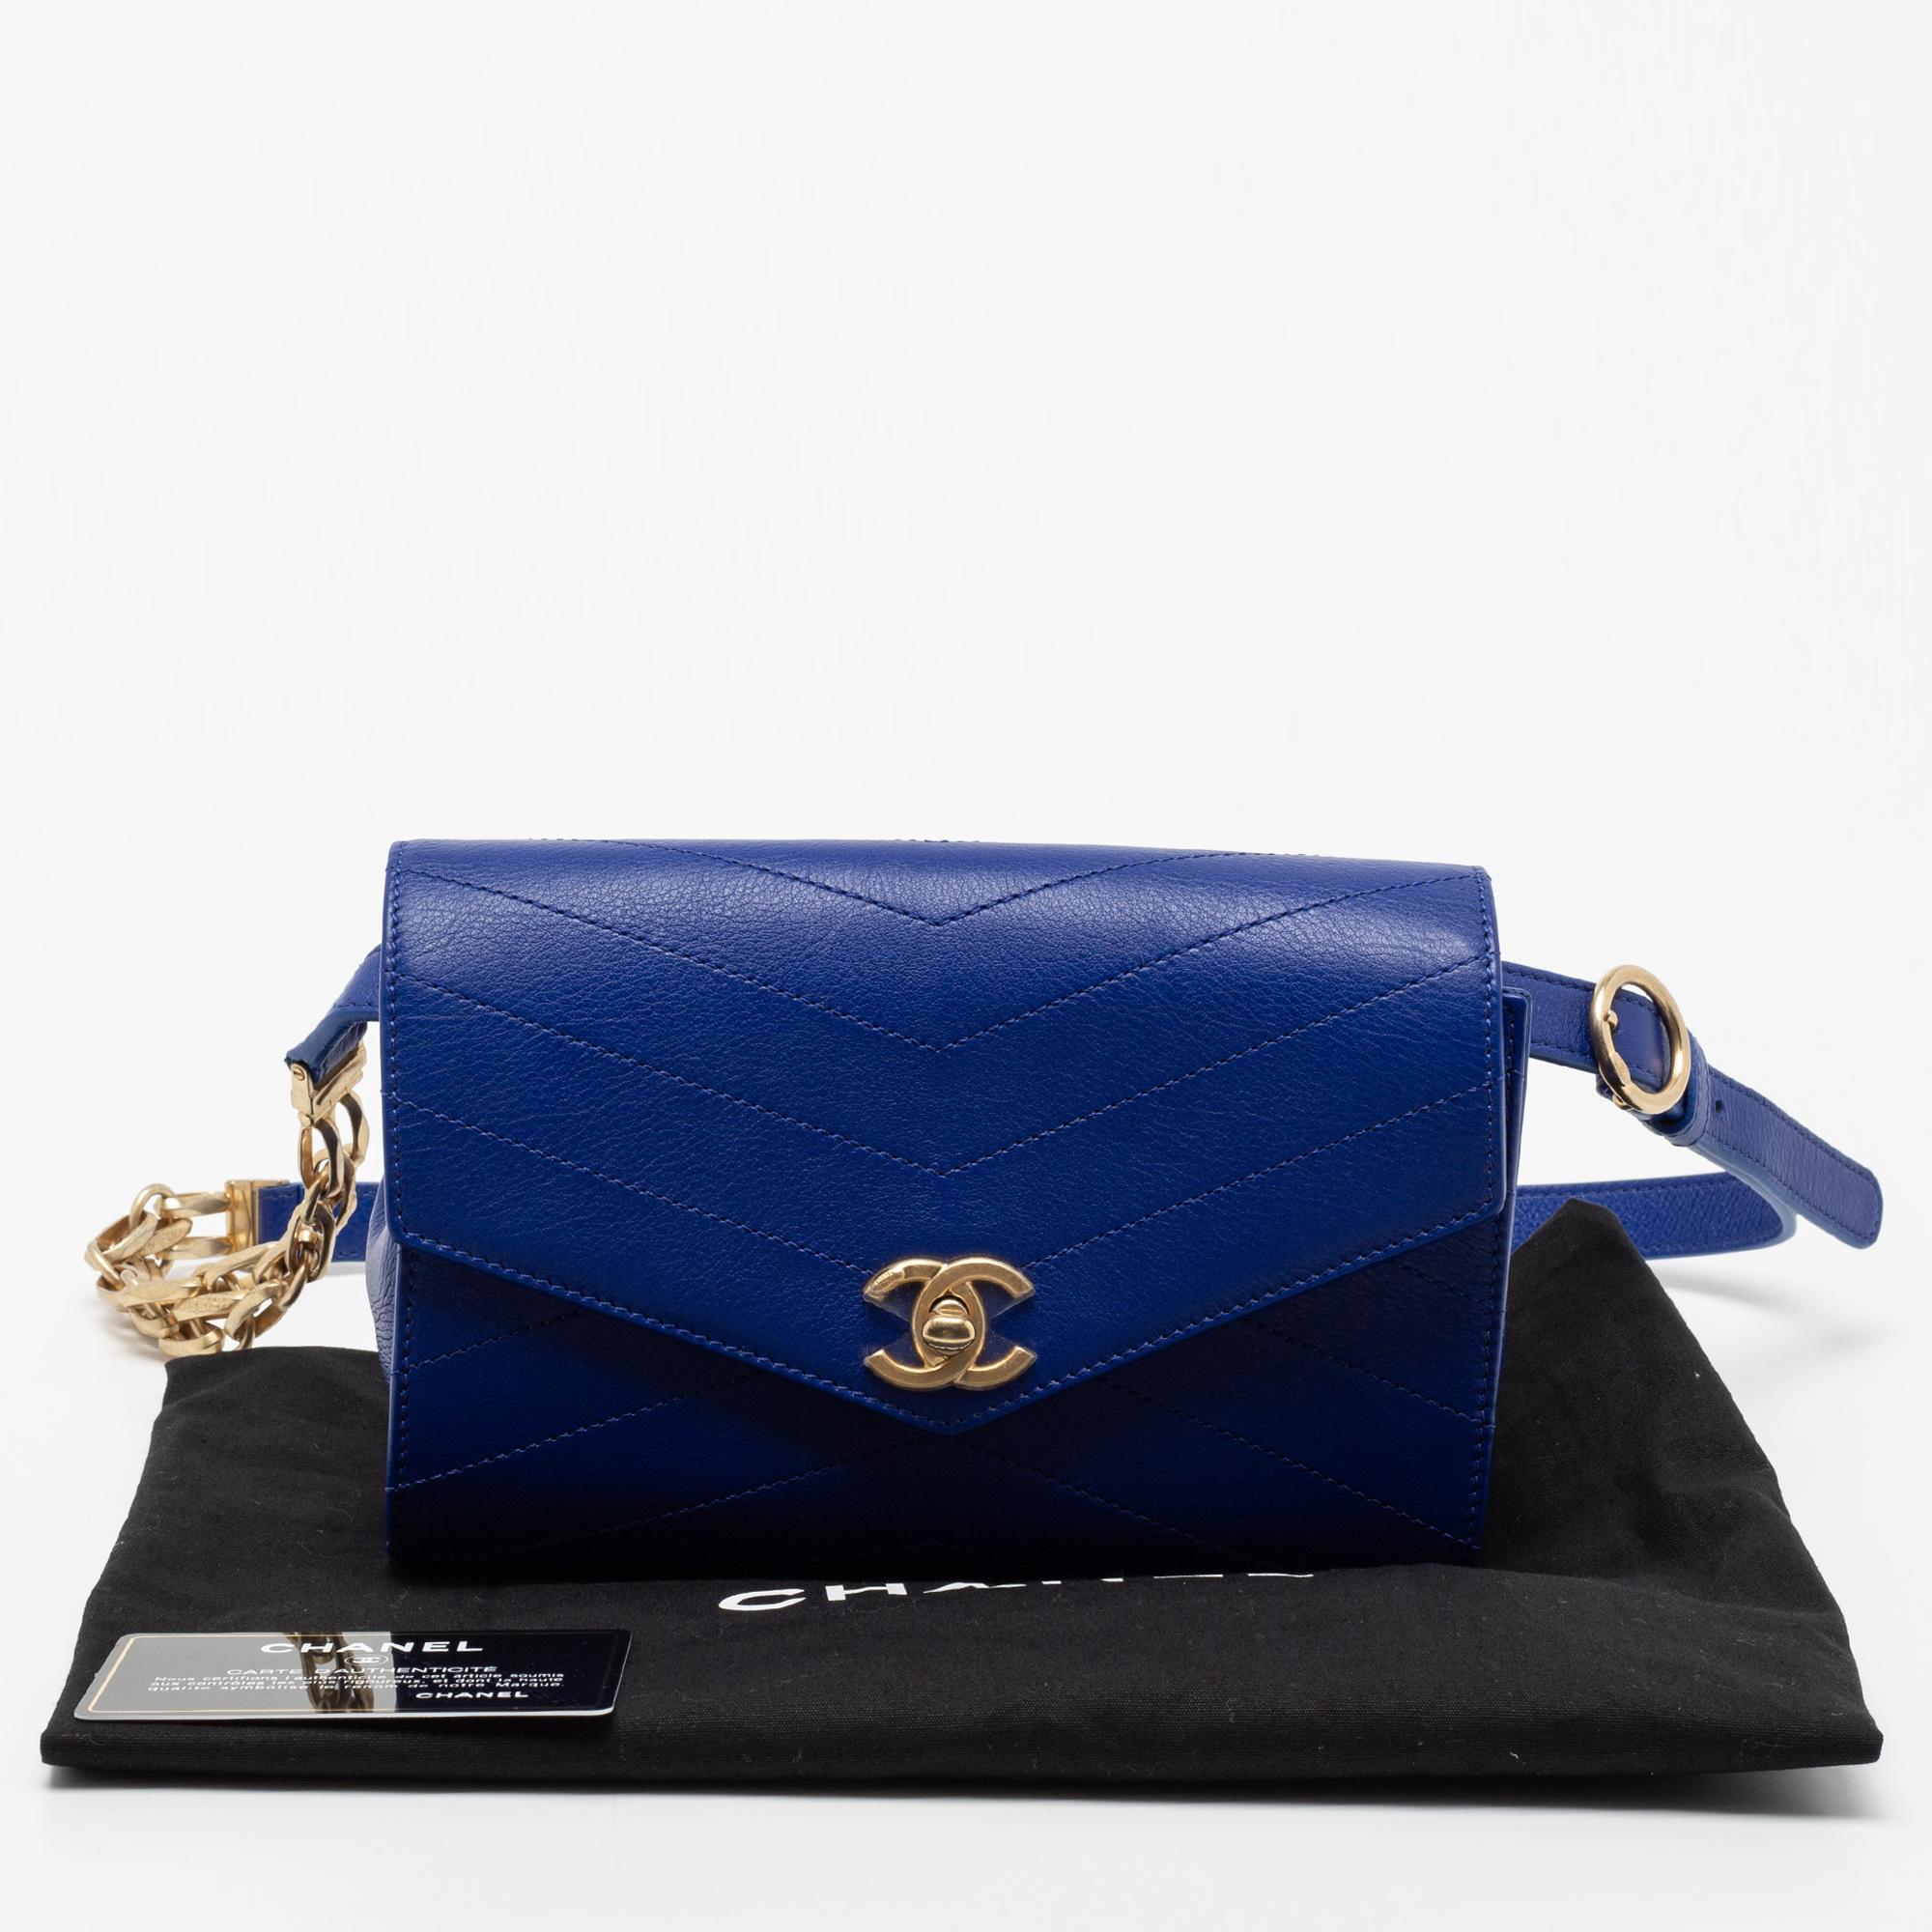 Chanel Blue Chevron Stitched Leather Small Coco Waist Bag 9